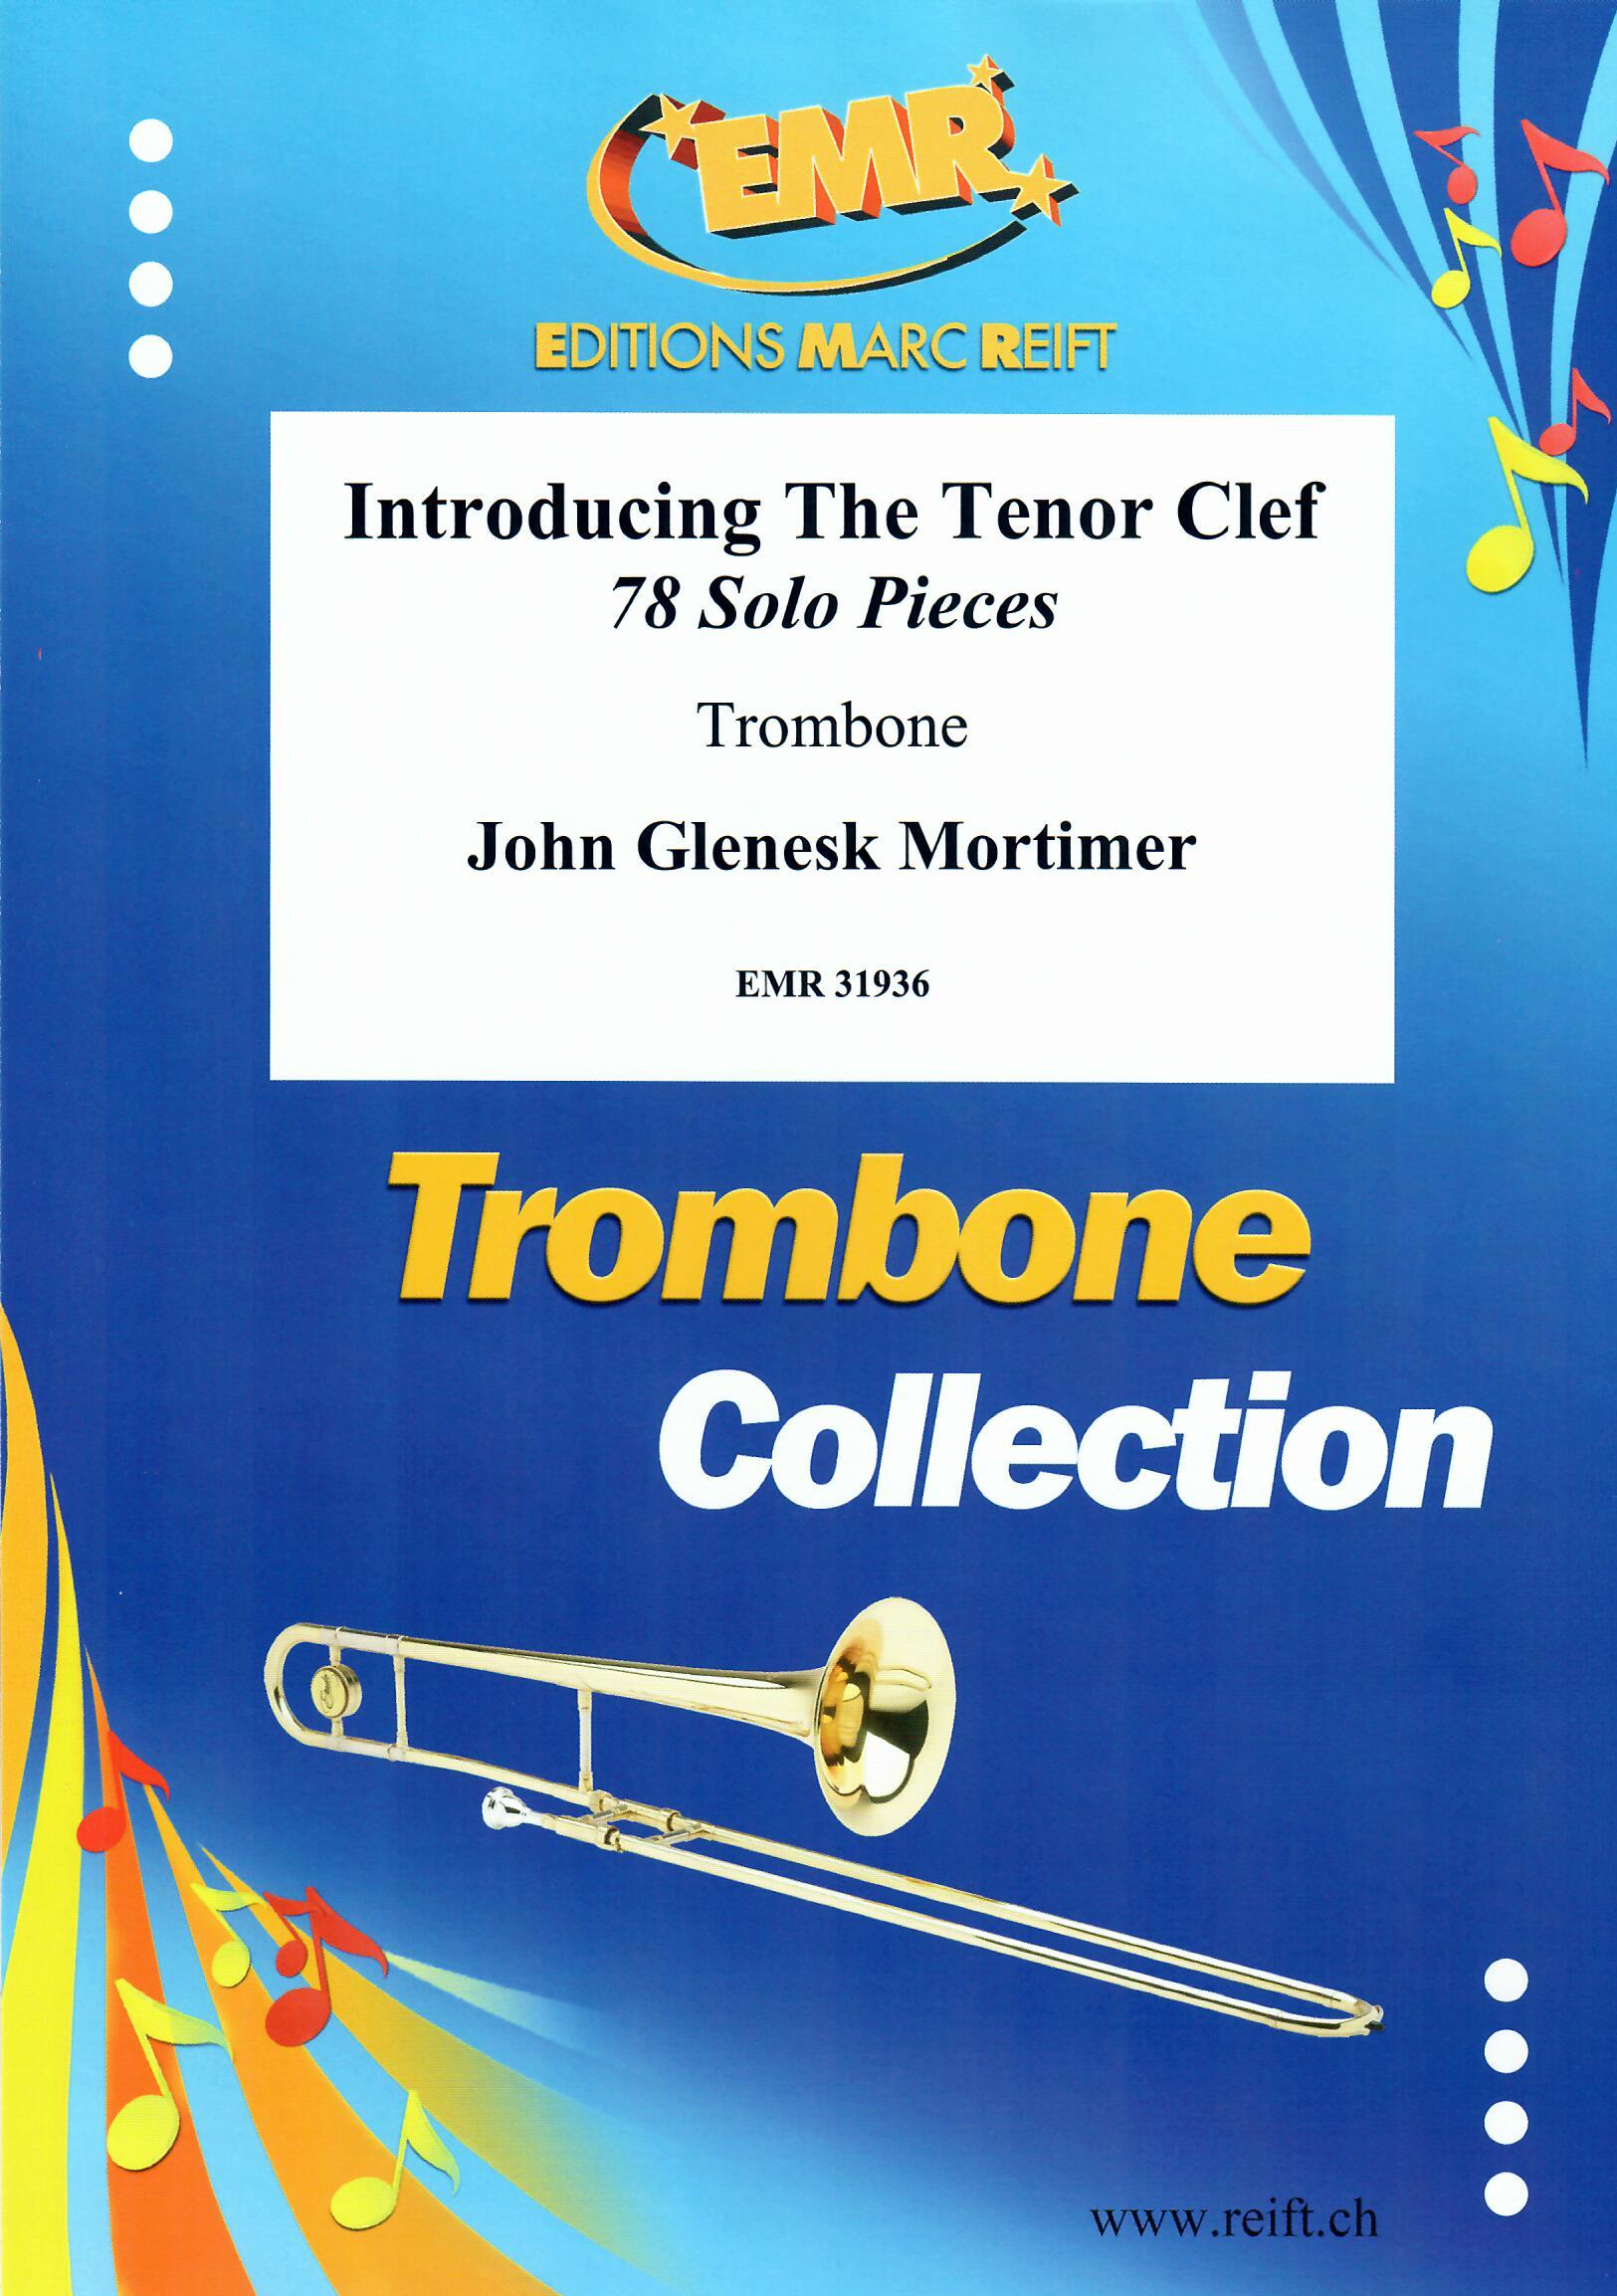 INTRODUCING THE TENOR CLEF (78 SOLO PIECES)